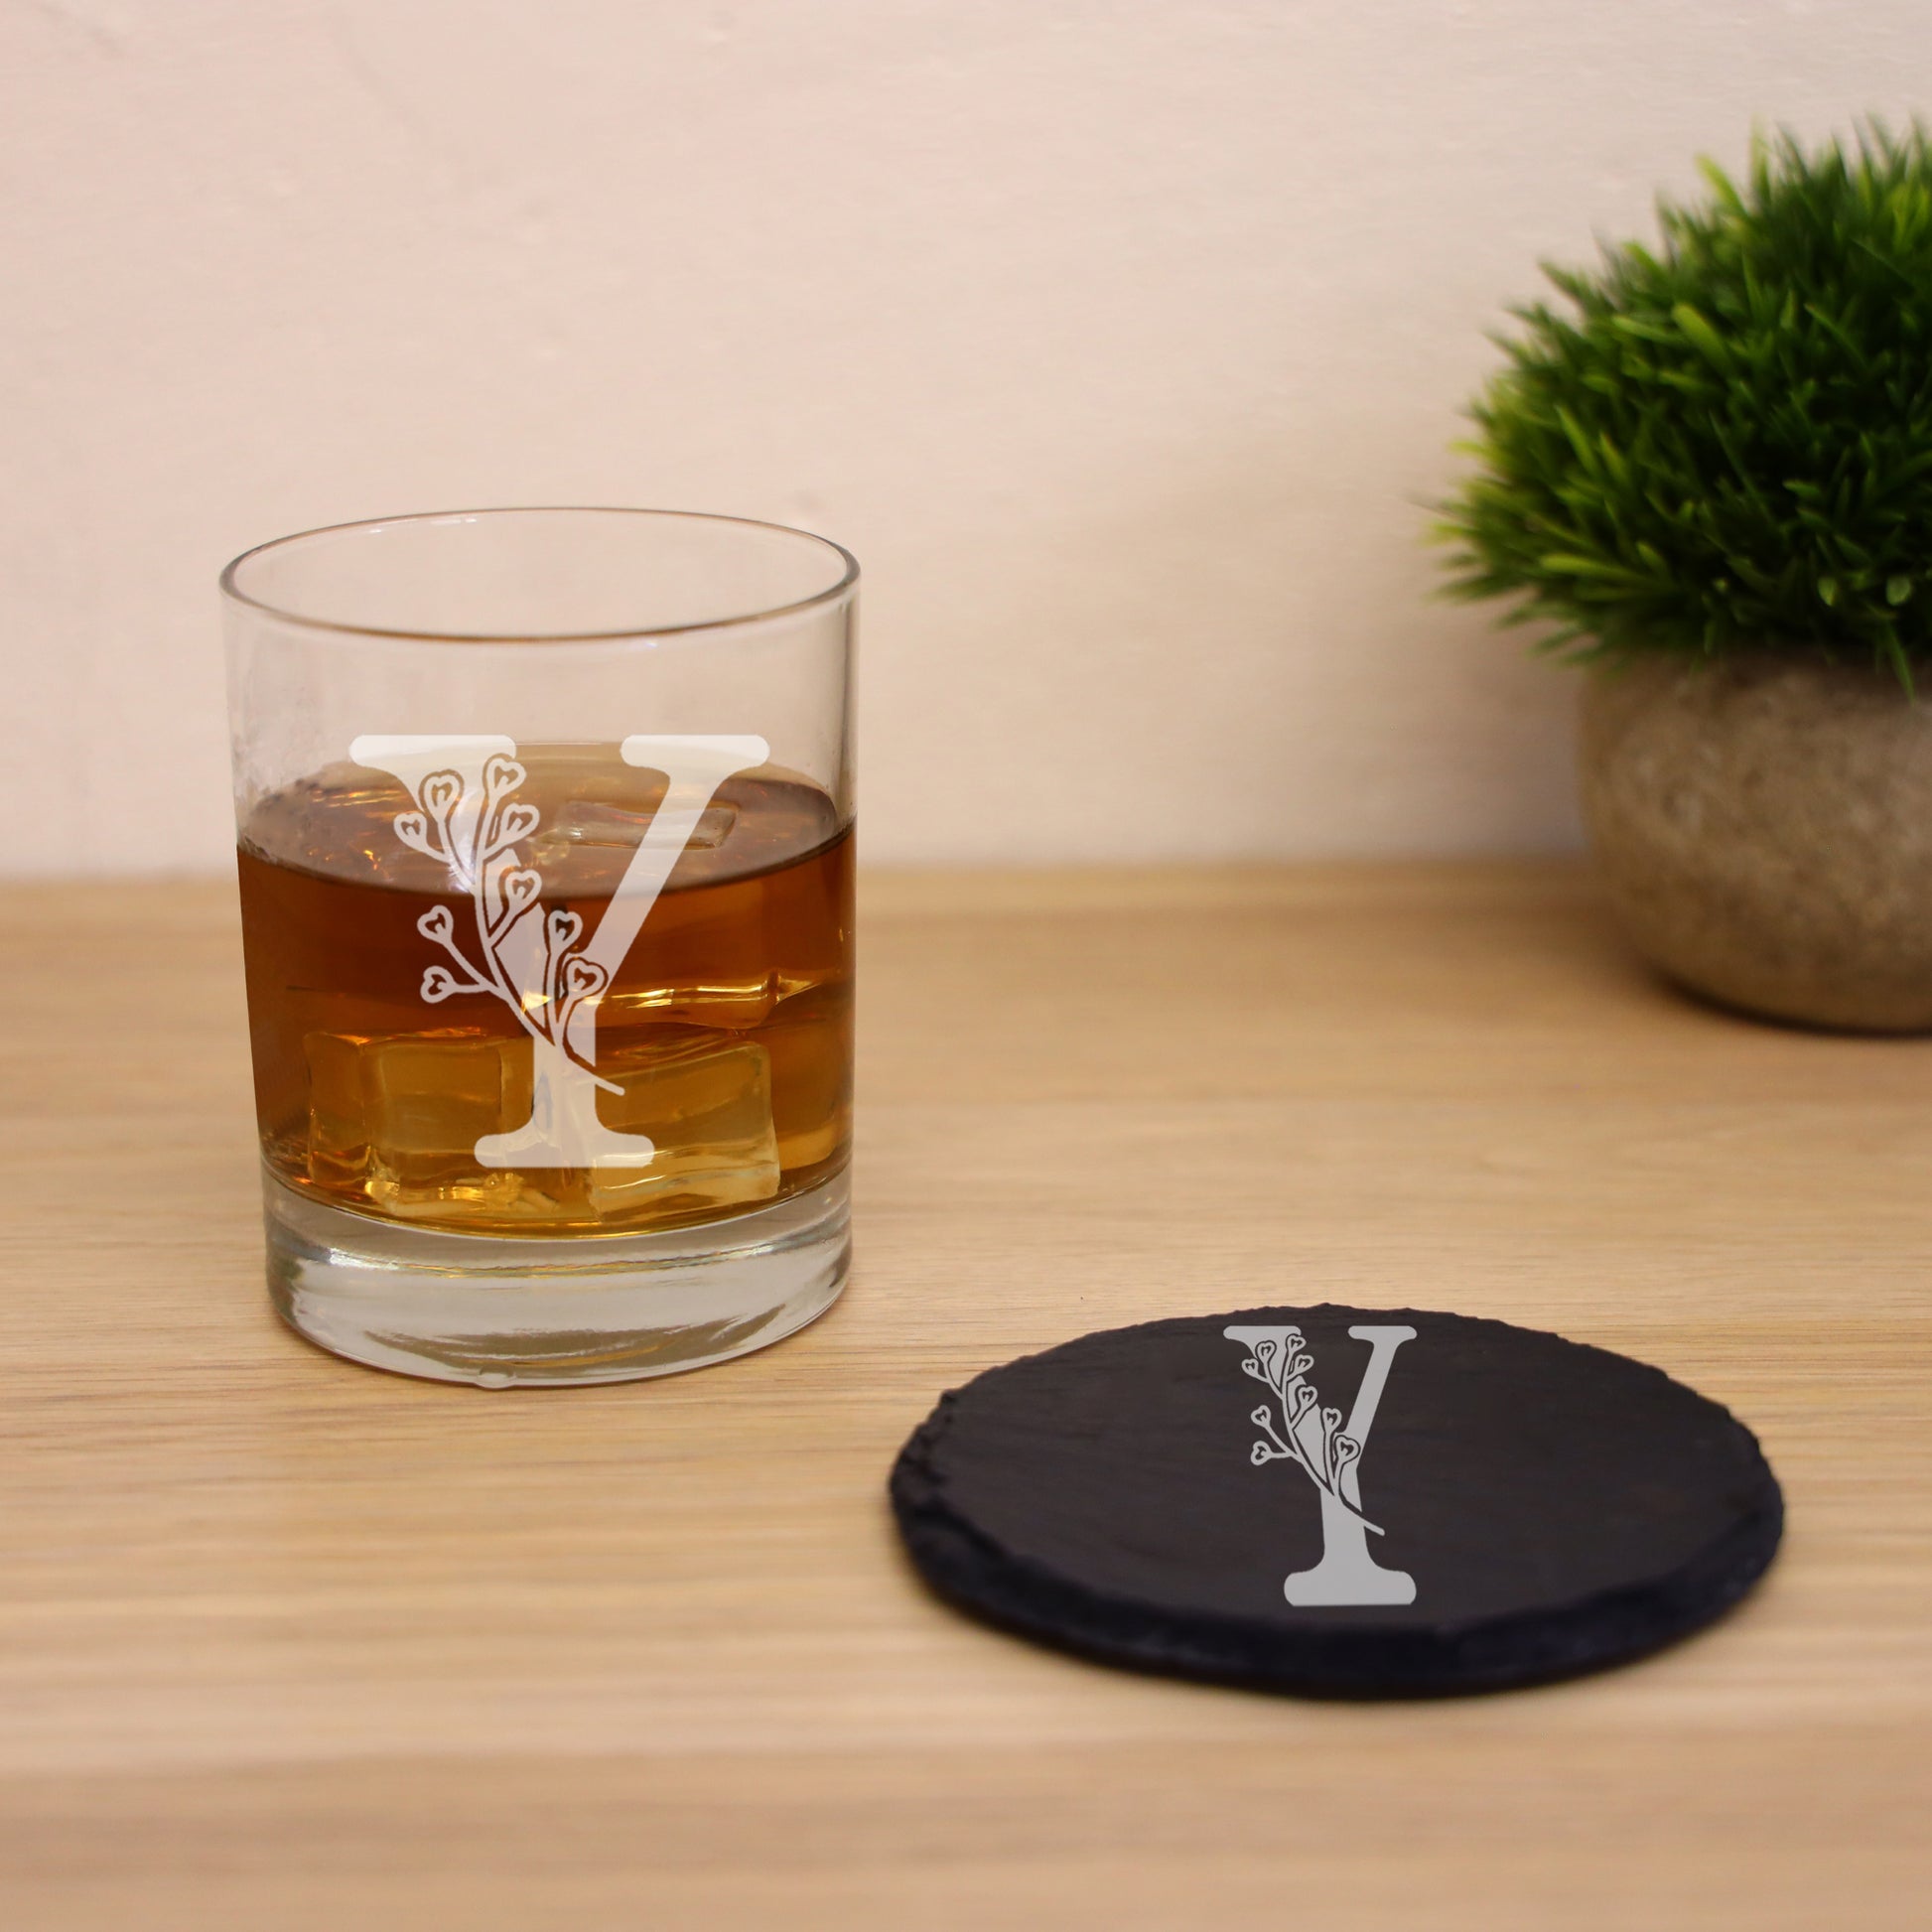 Personalised Engraved Monogram Initial Design Whisky Glass and/or Coaster Gift  - Always Looking Good -   